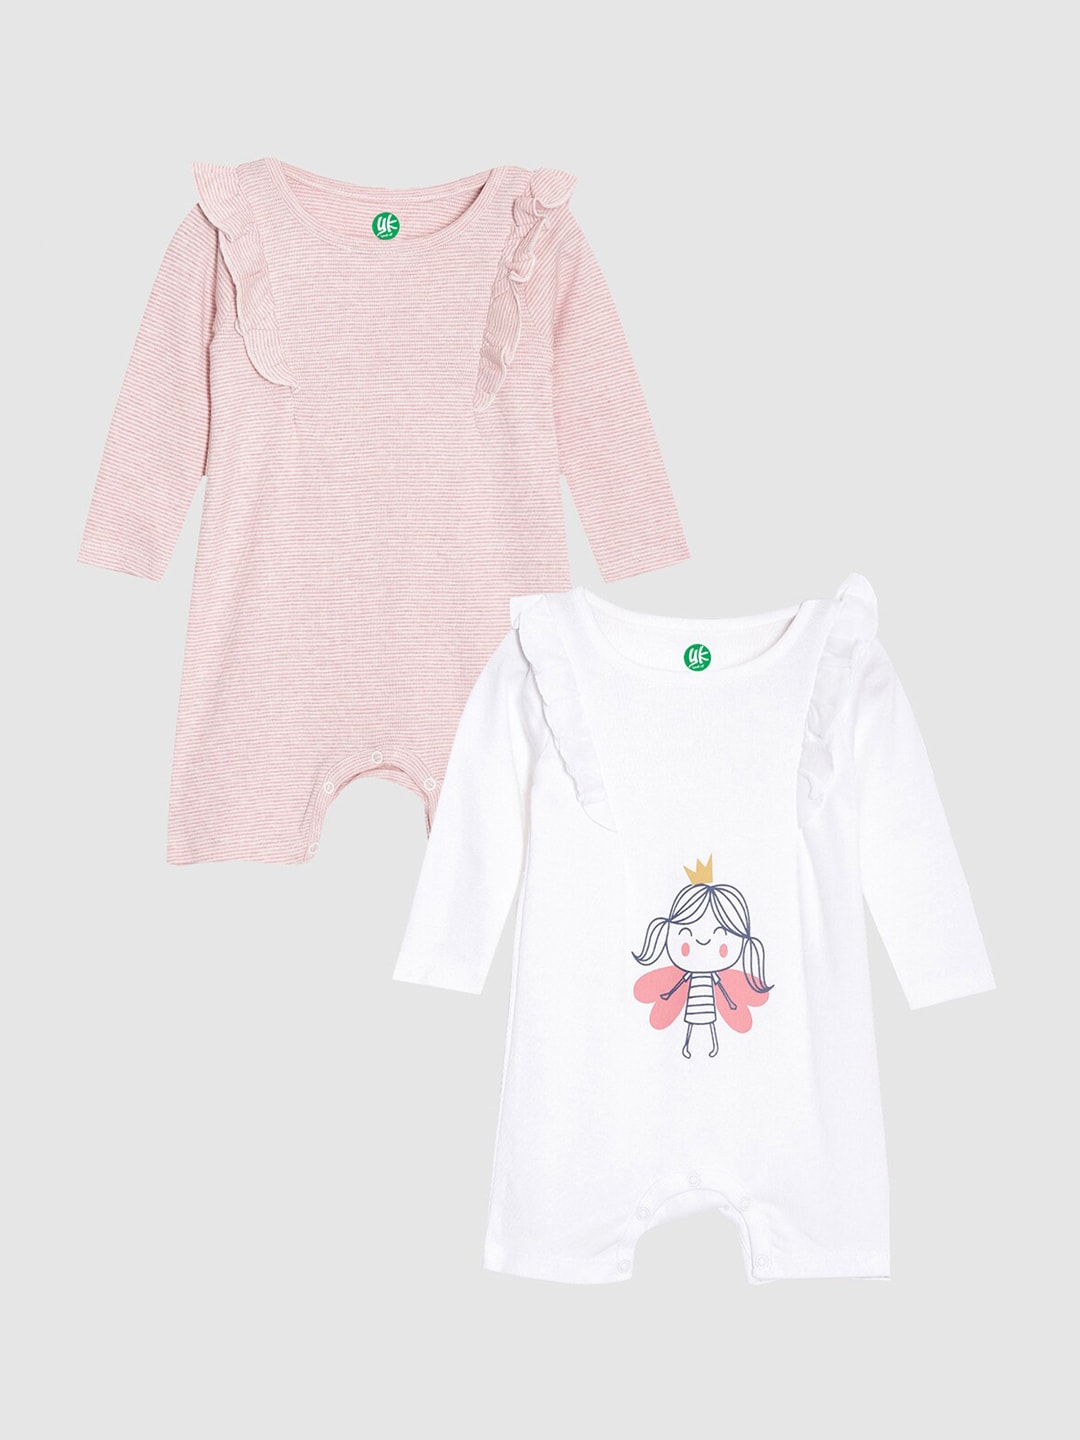 YK Organic Infants Girls Pack Of 2 Pink and White Pure Organic Cotton Rompers